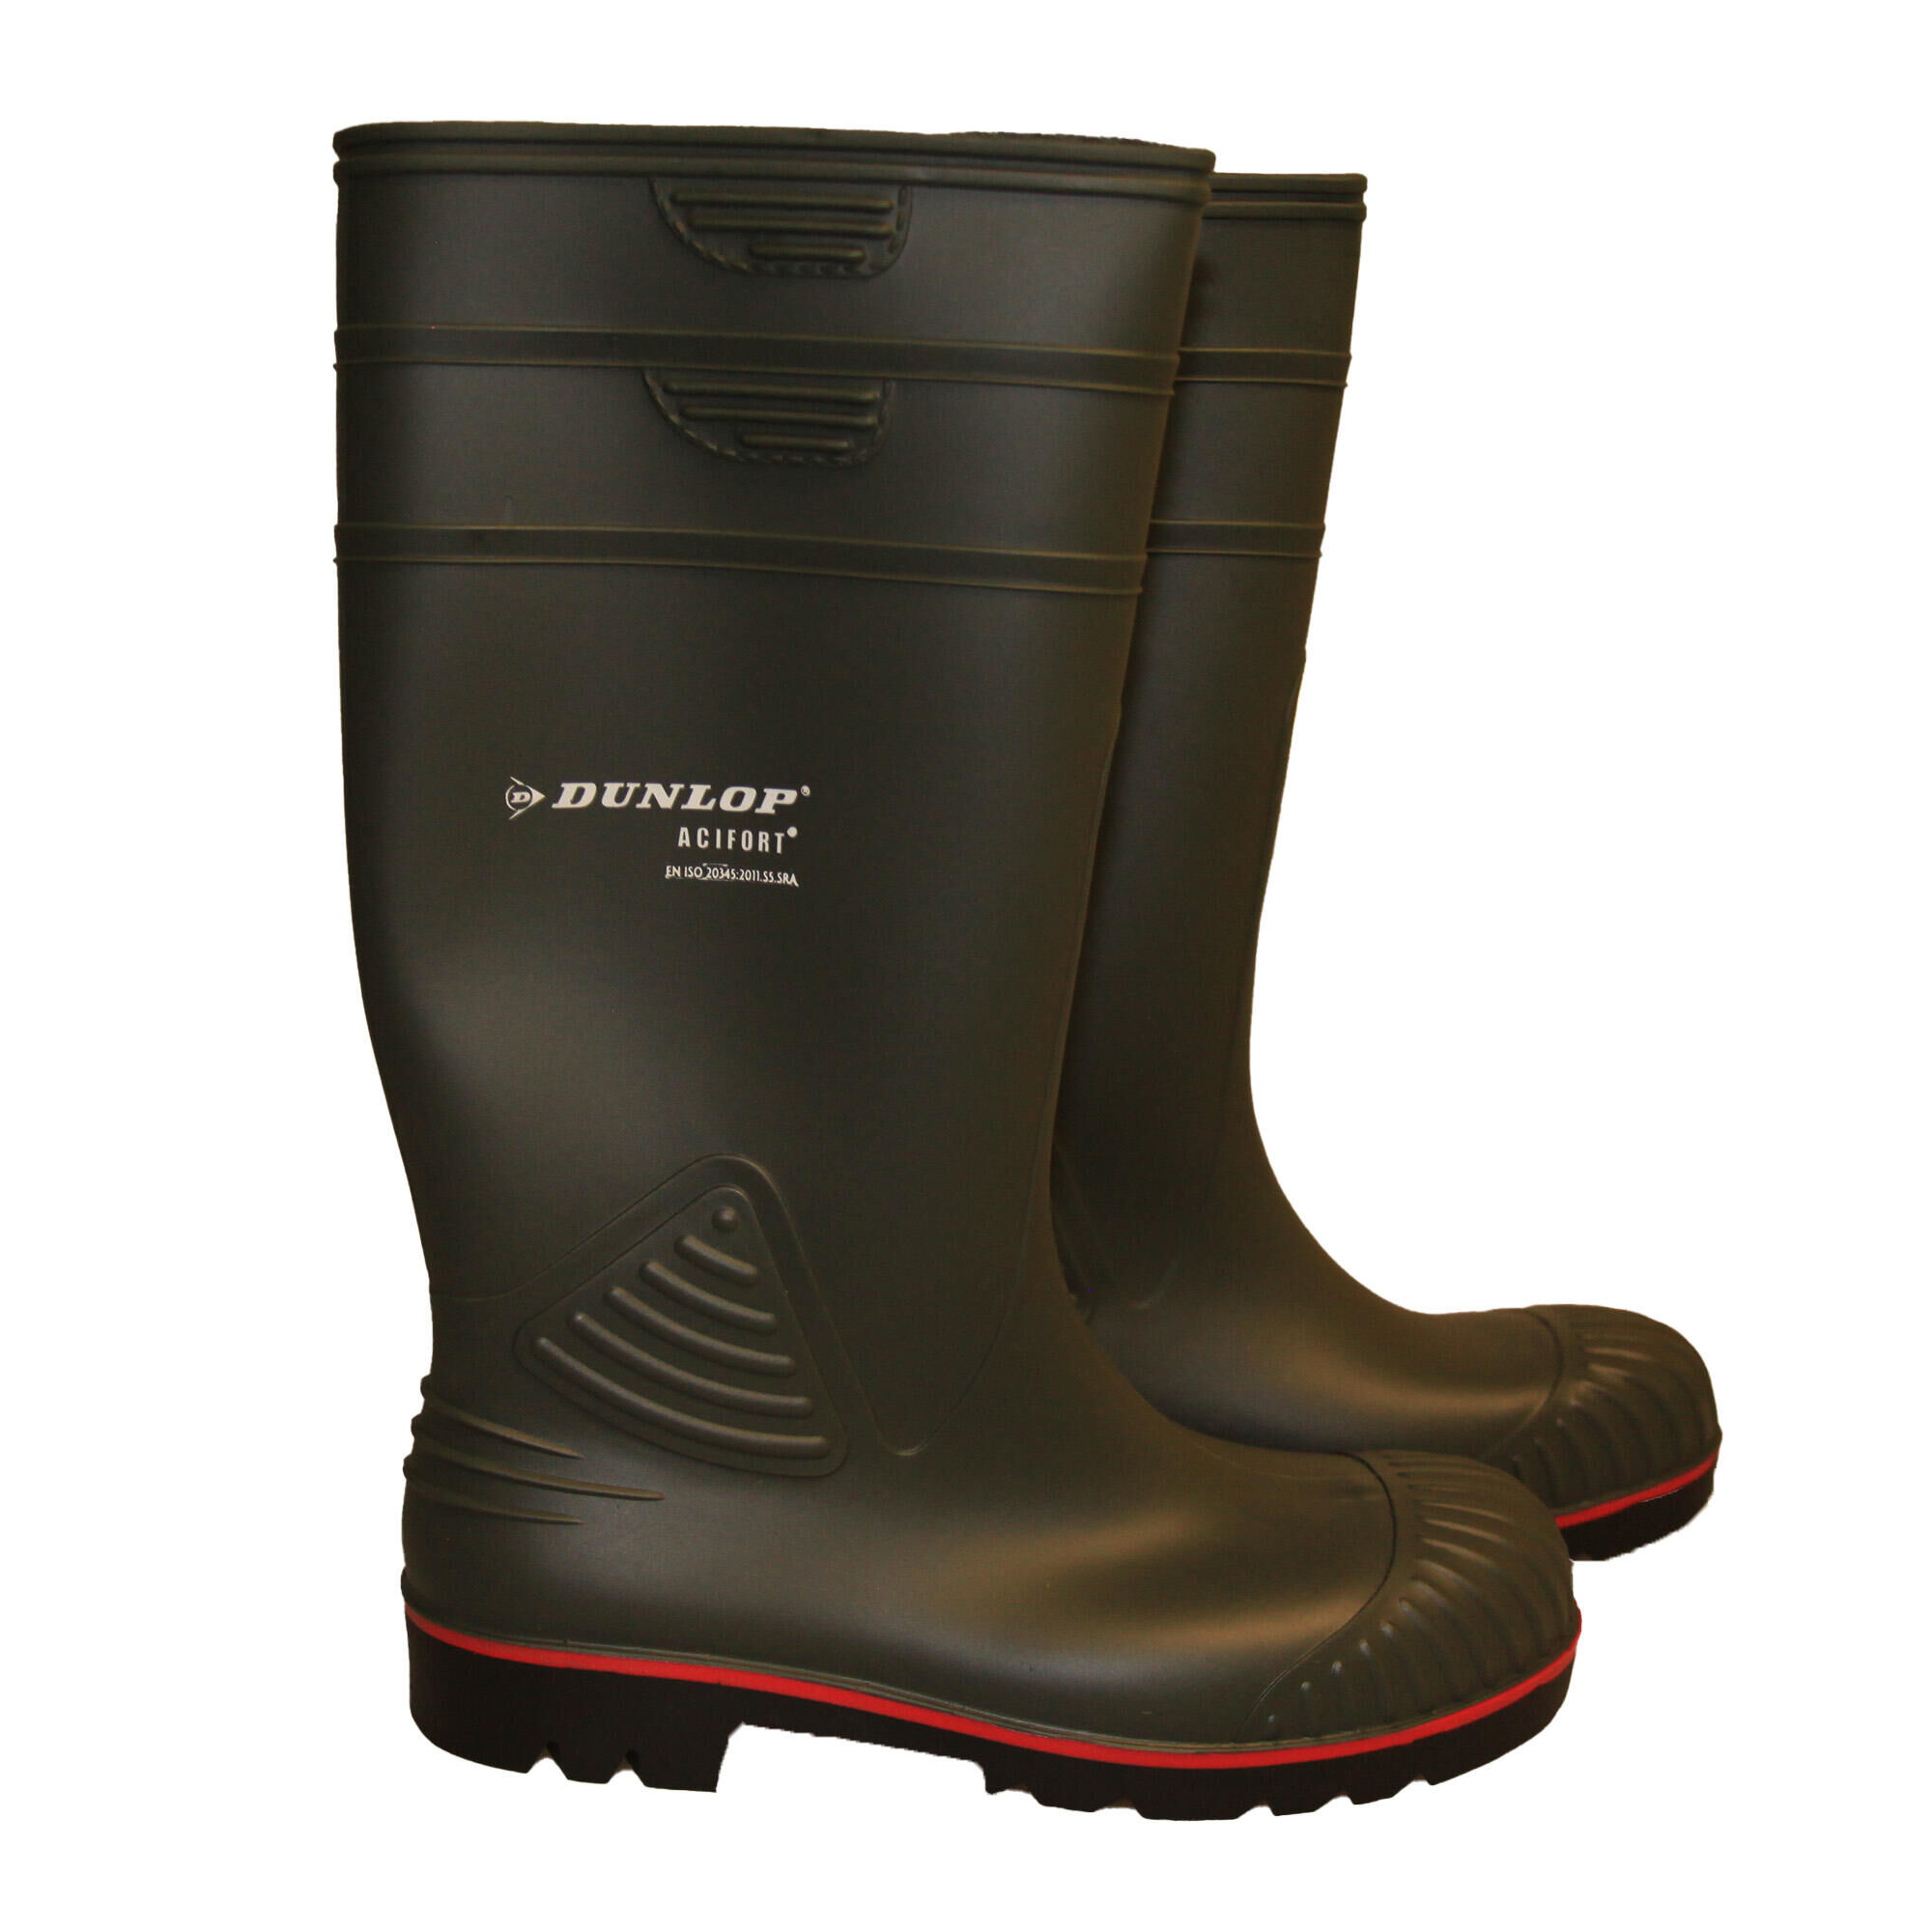 DUNLOP Mens Acifort Heavy Duty Full Safety Wellies (Red/Brown)